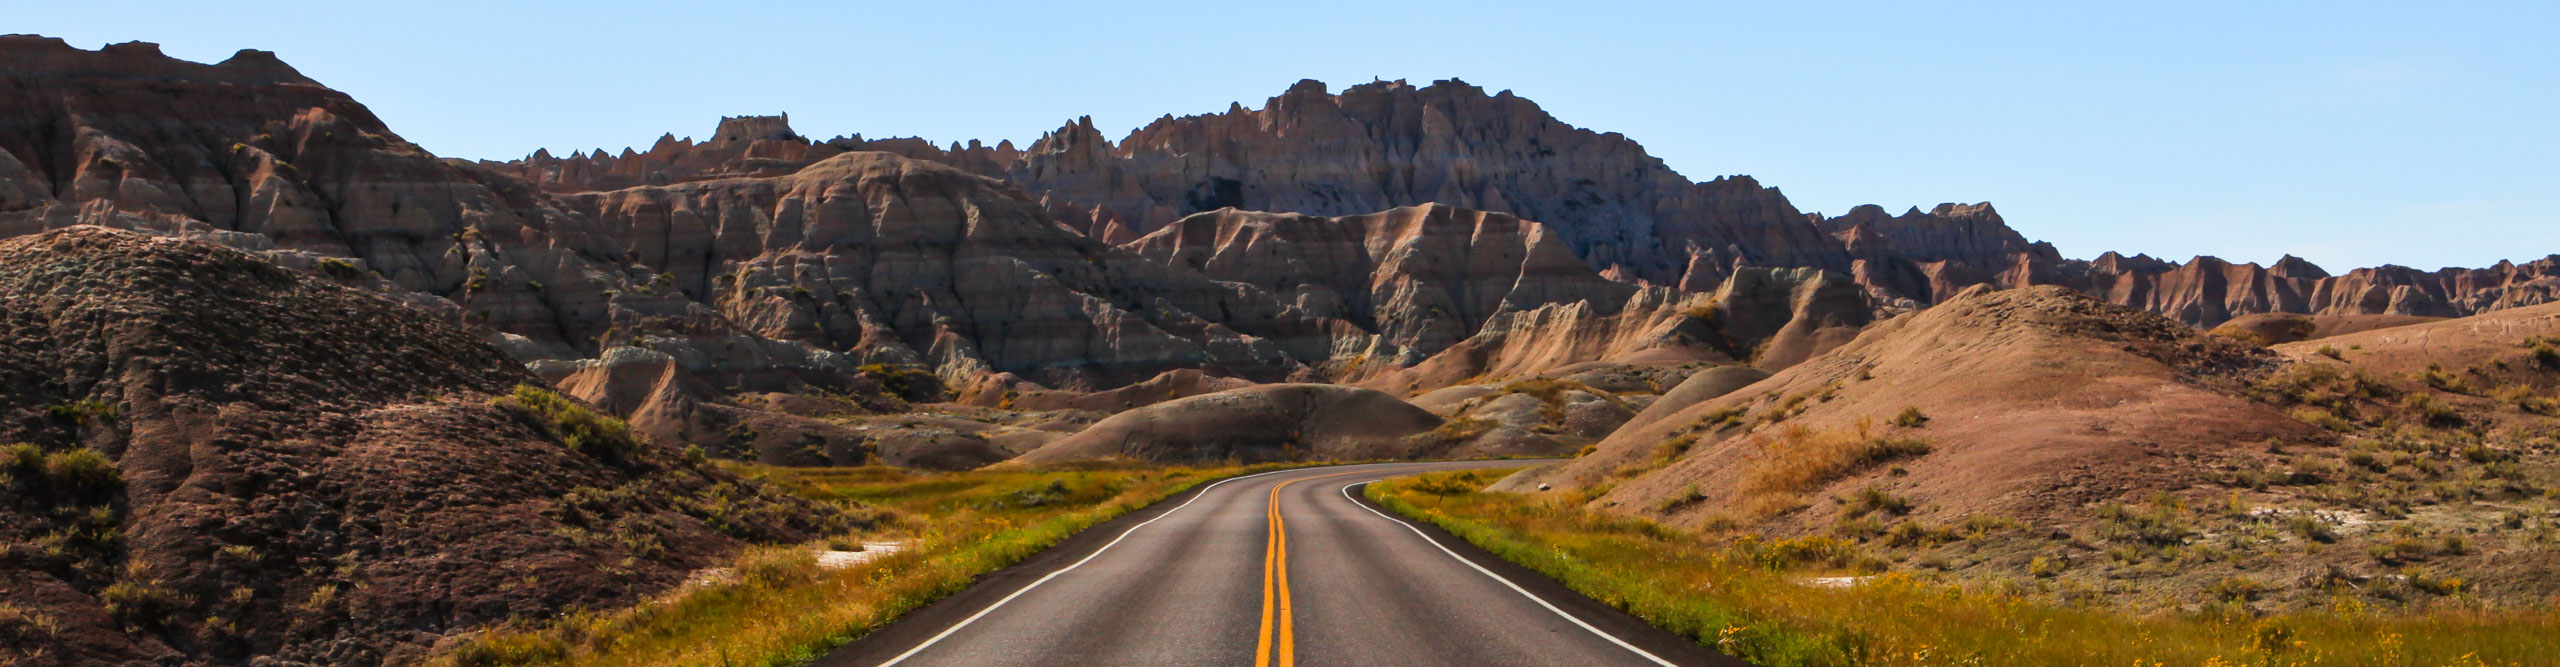 long straight road  in Badlands National Park, South Dakota, on a clear sunny day